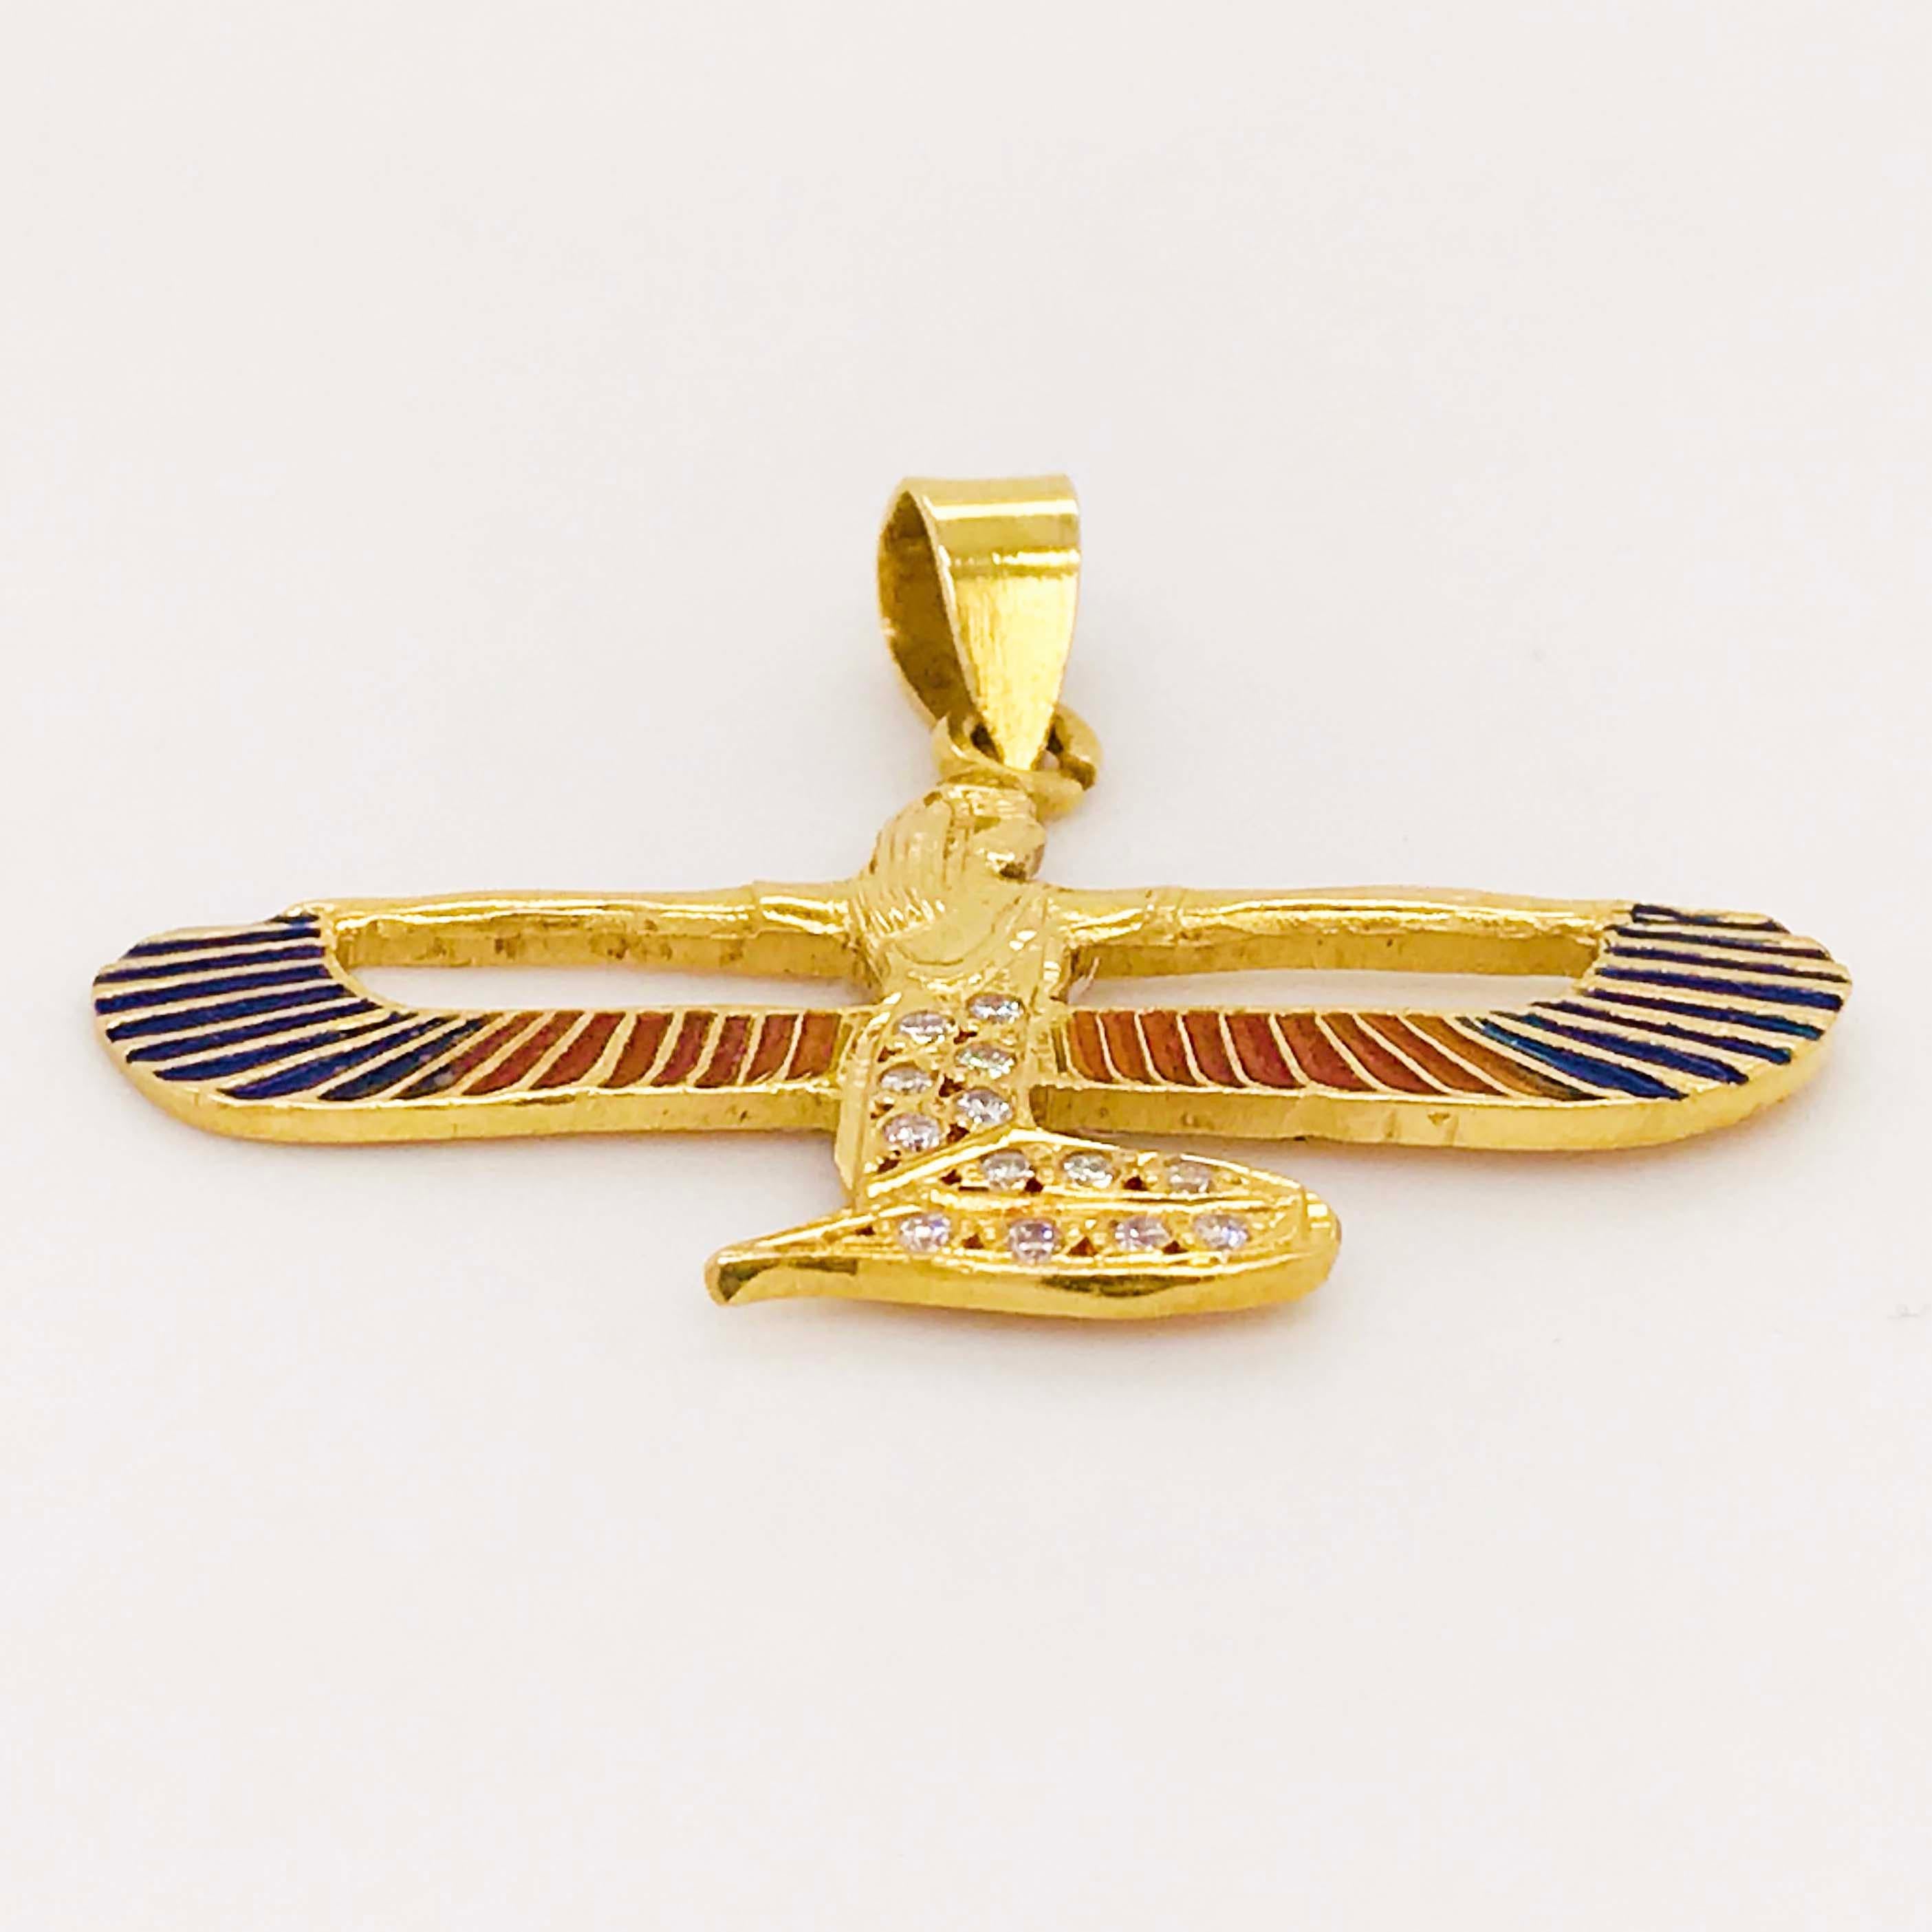 The Egyptian Goddess of Protection, Fertility & Magic, known as Isi, has protected and represented Women for centuries. Isi (who had a son with Osiris, named Horus)  is a protection goddess who heals the sick and protects women and children. What a